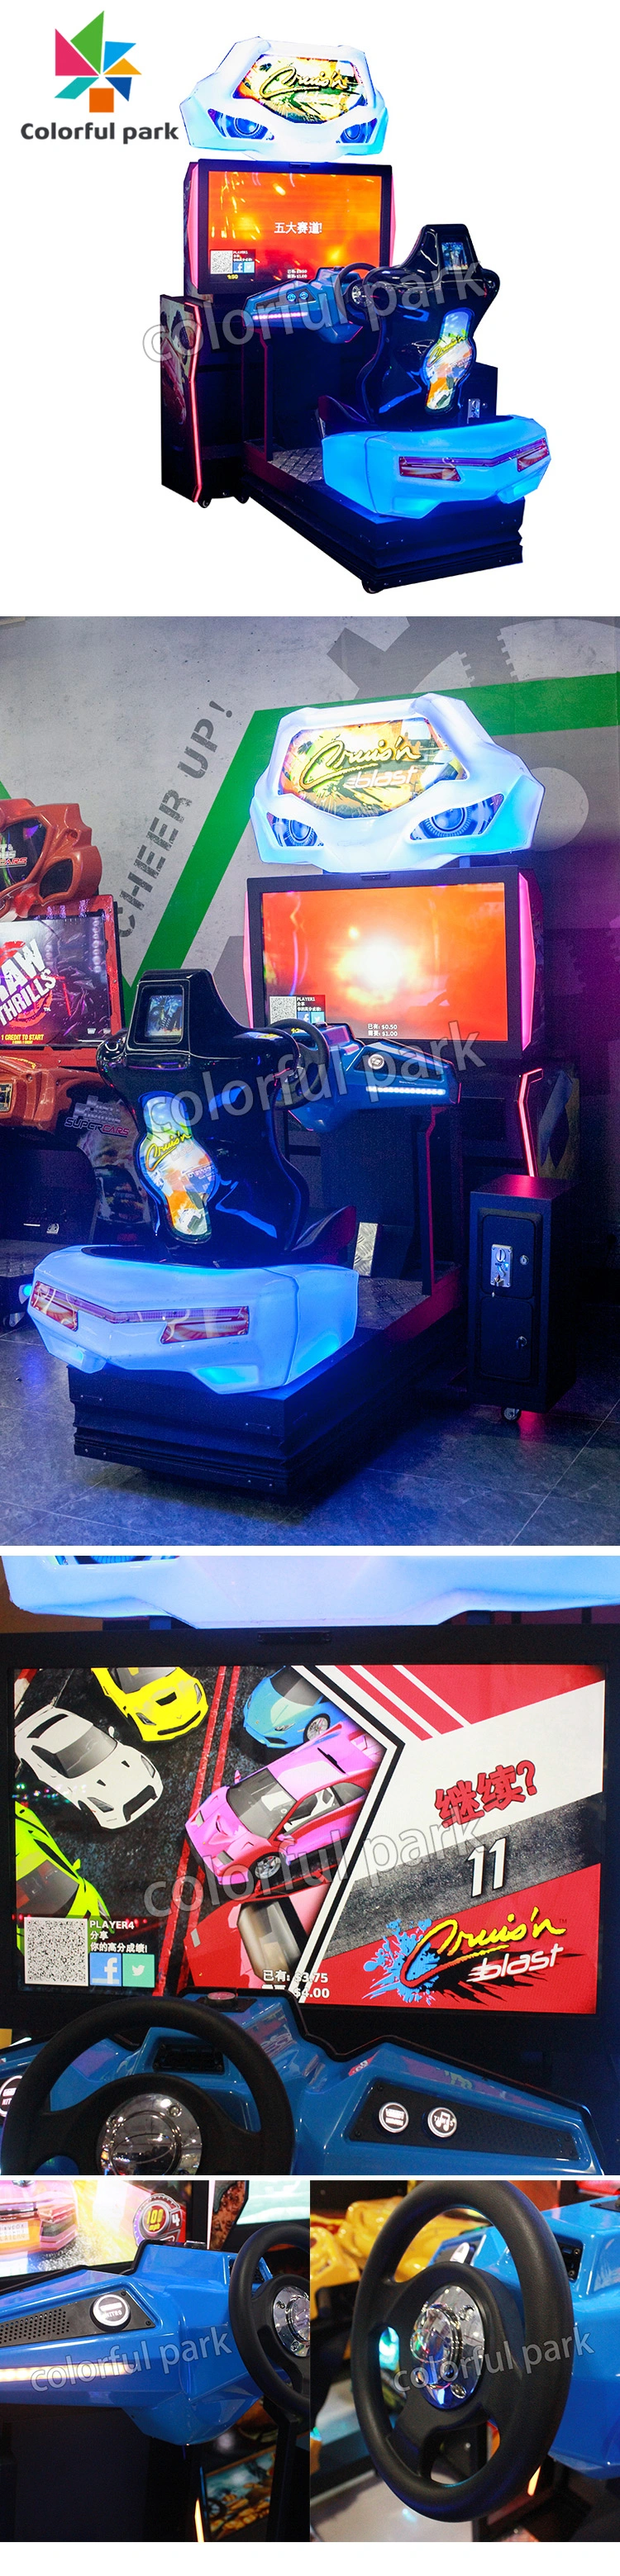 Video Game Cabinet for Sale Cheap Arcade Game Machinestiny Arcade Machine Price Upright Video Game Machines